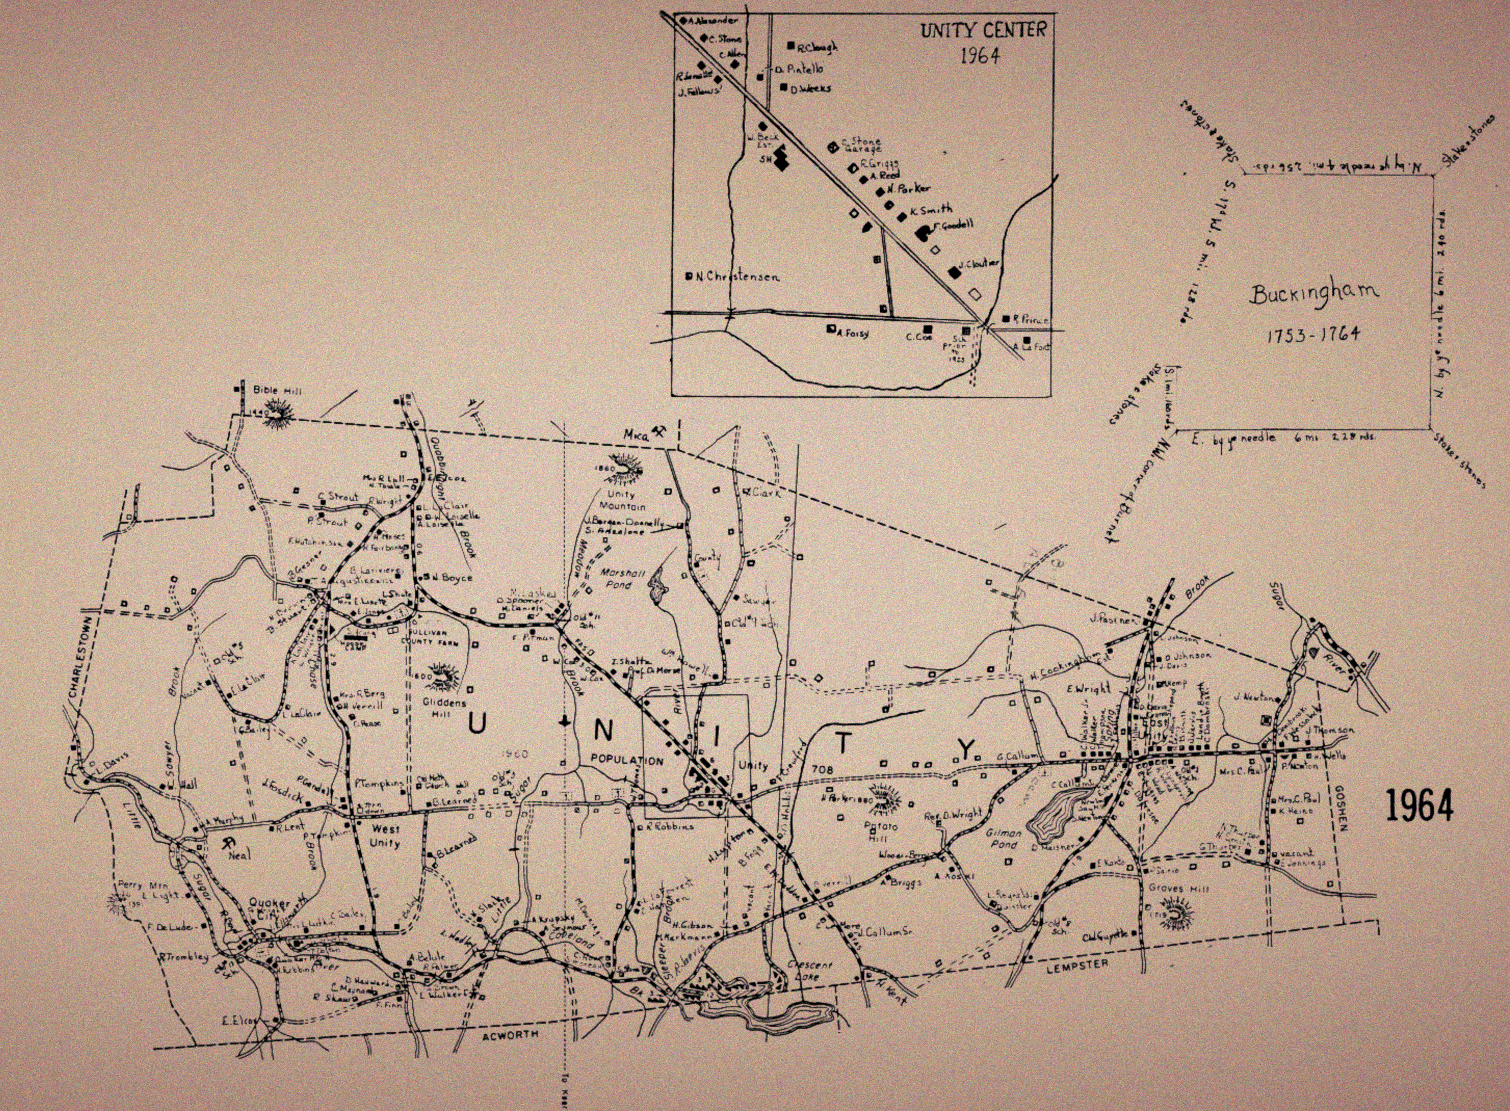 Old Map of the Town of Unity, NH from 1964 with an inset of what the town was called in the past